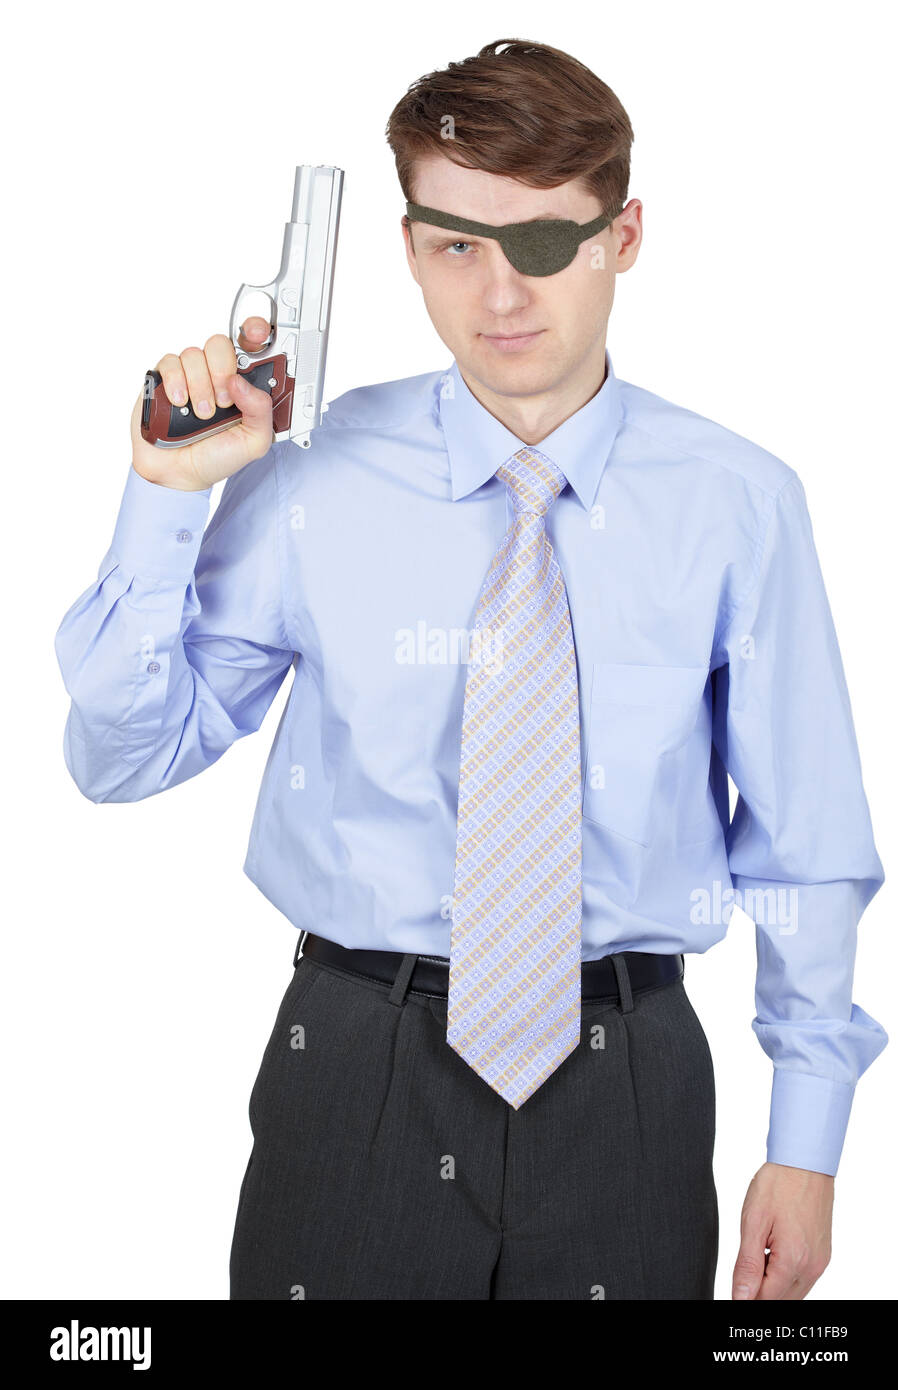 Portrait of man armed with a pistol on white background Stock Photo